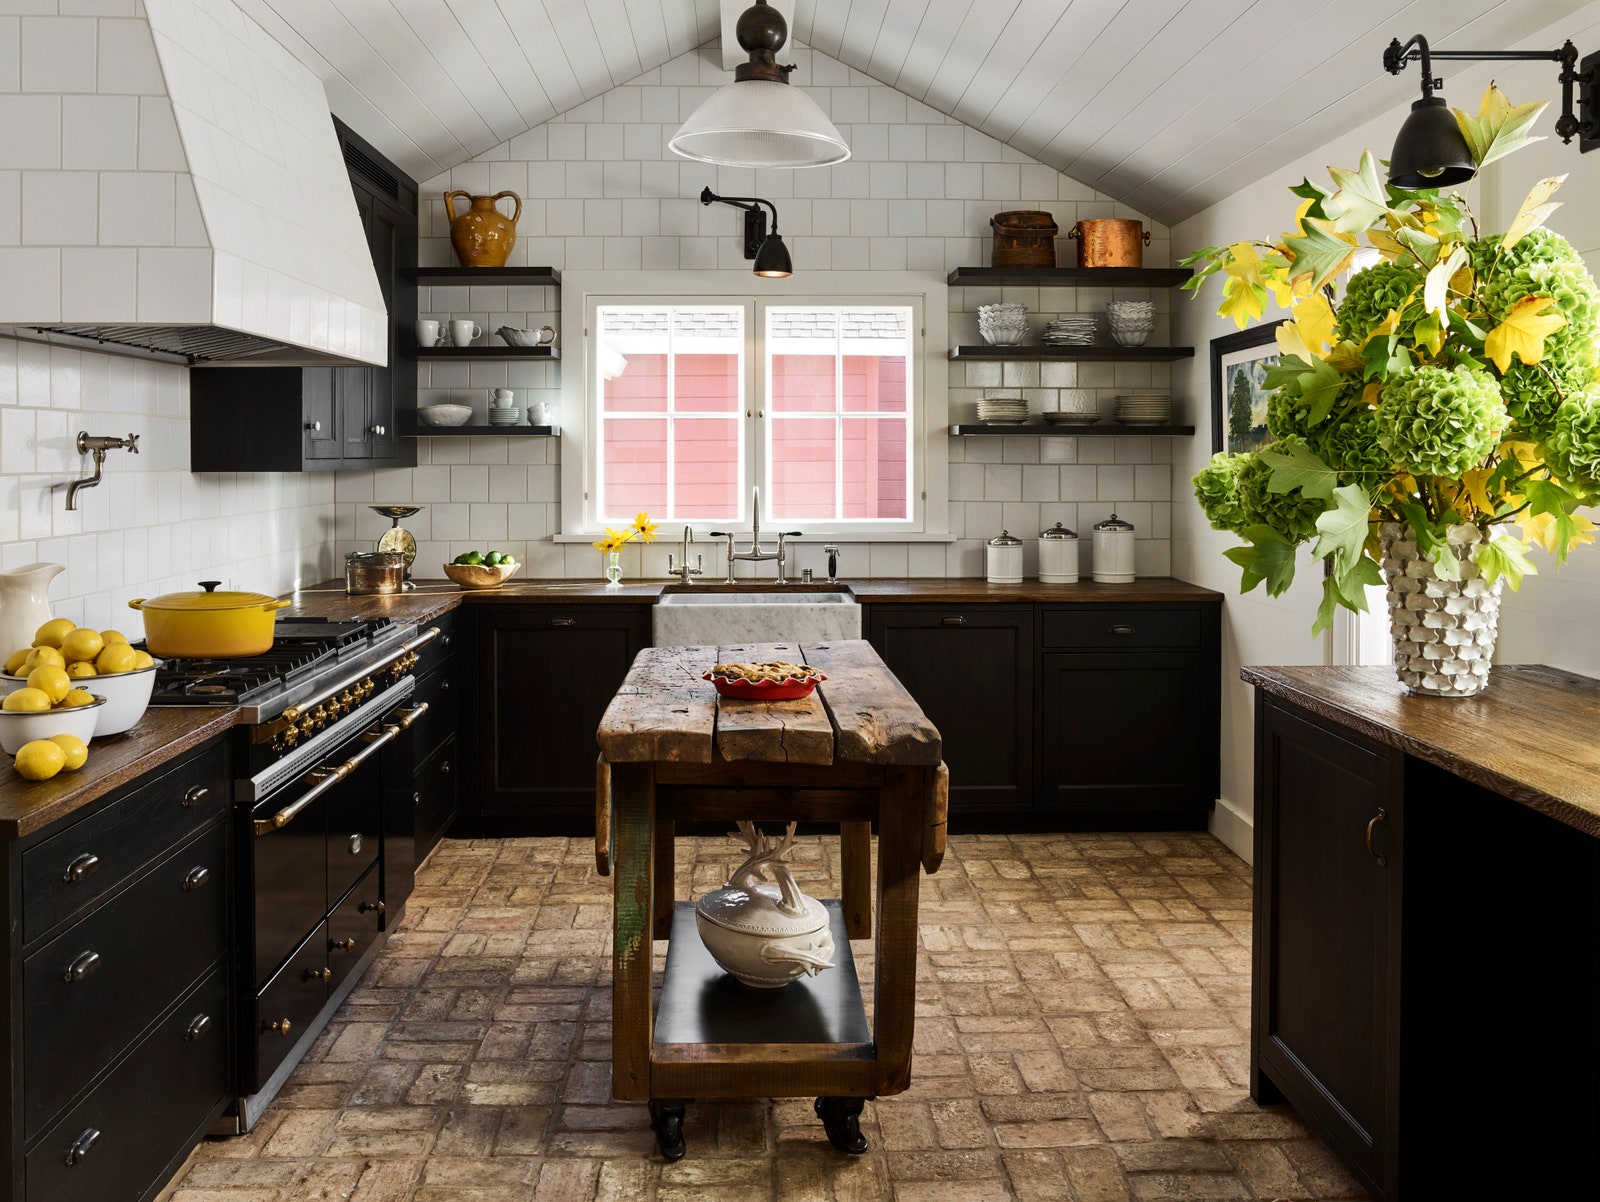 a black and white kitchen with a rustic antique central island made of wood